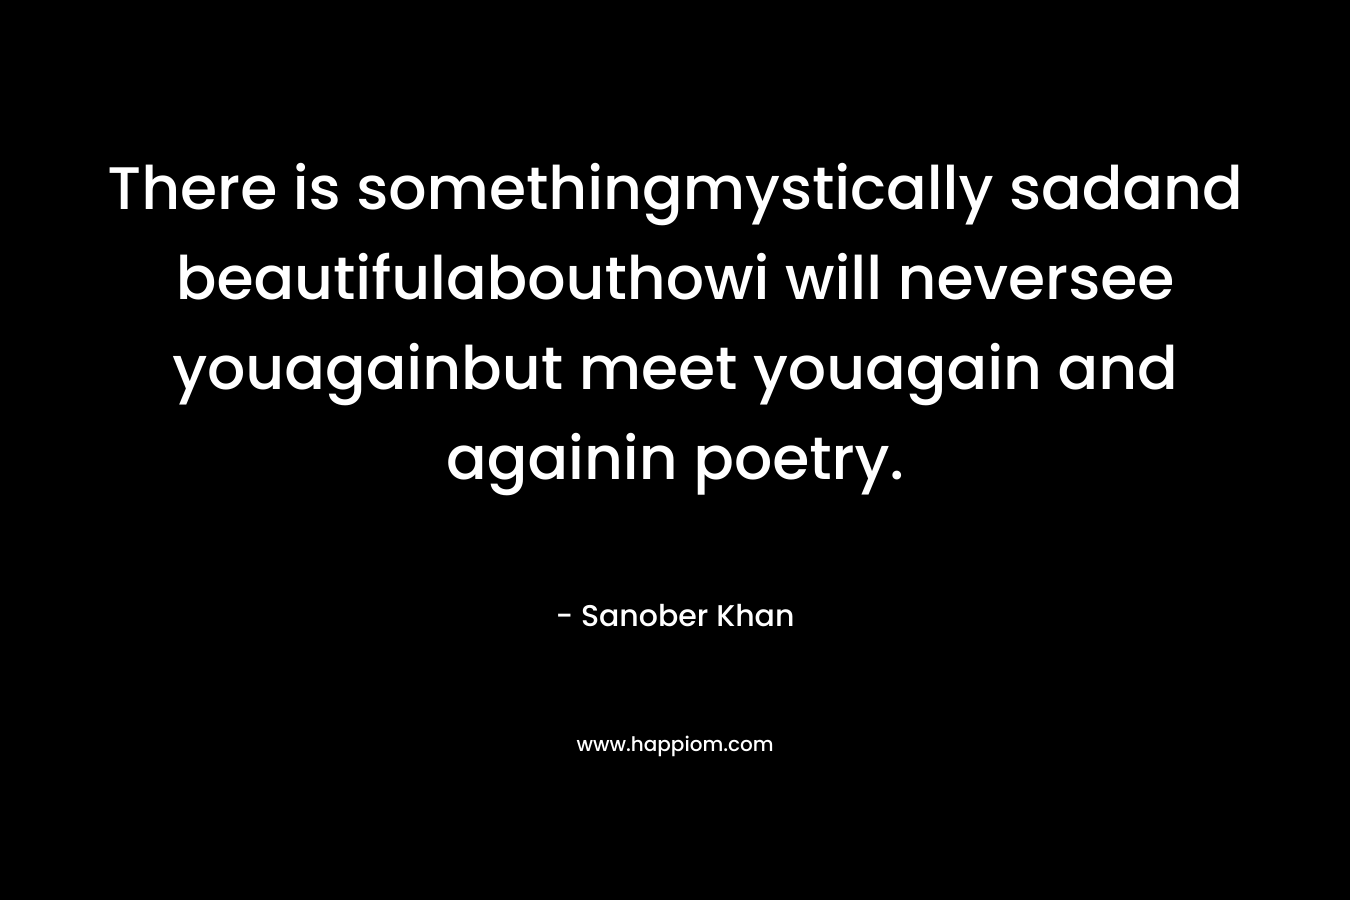 There is somethingmystically sadand beautifulabouthowi will neversee youagainbut meet youagain and againin poetry. – Sanober  Khan